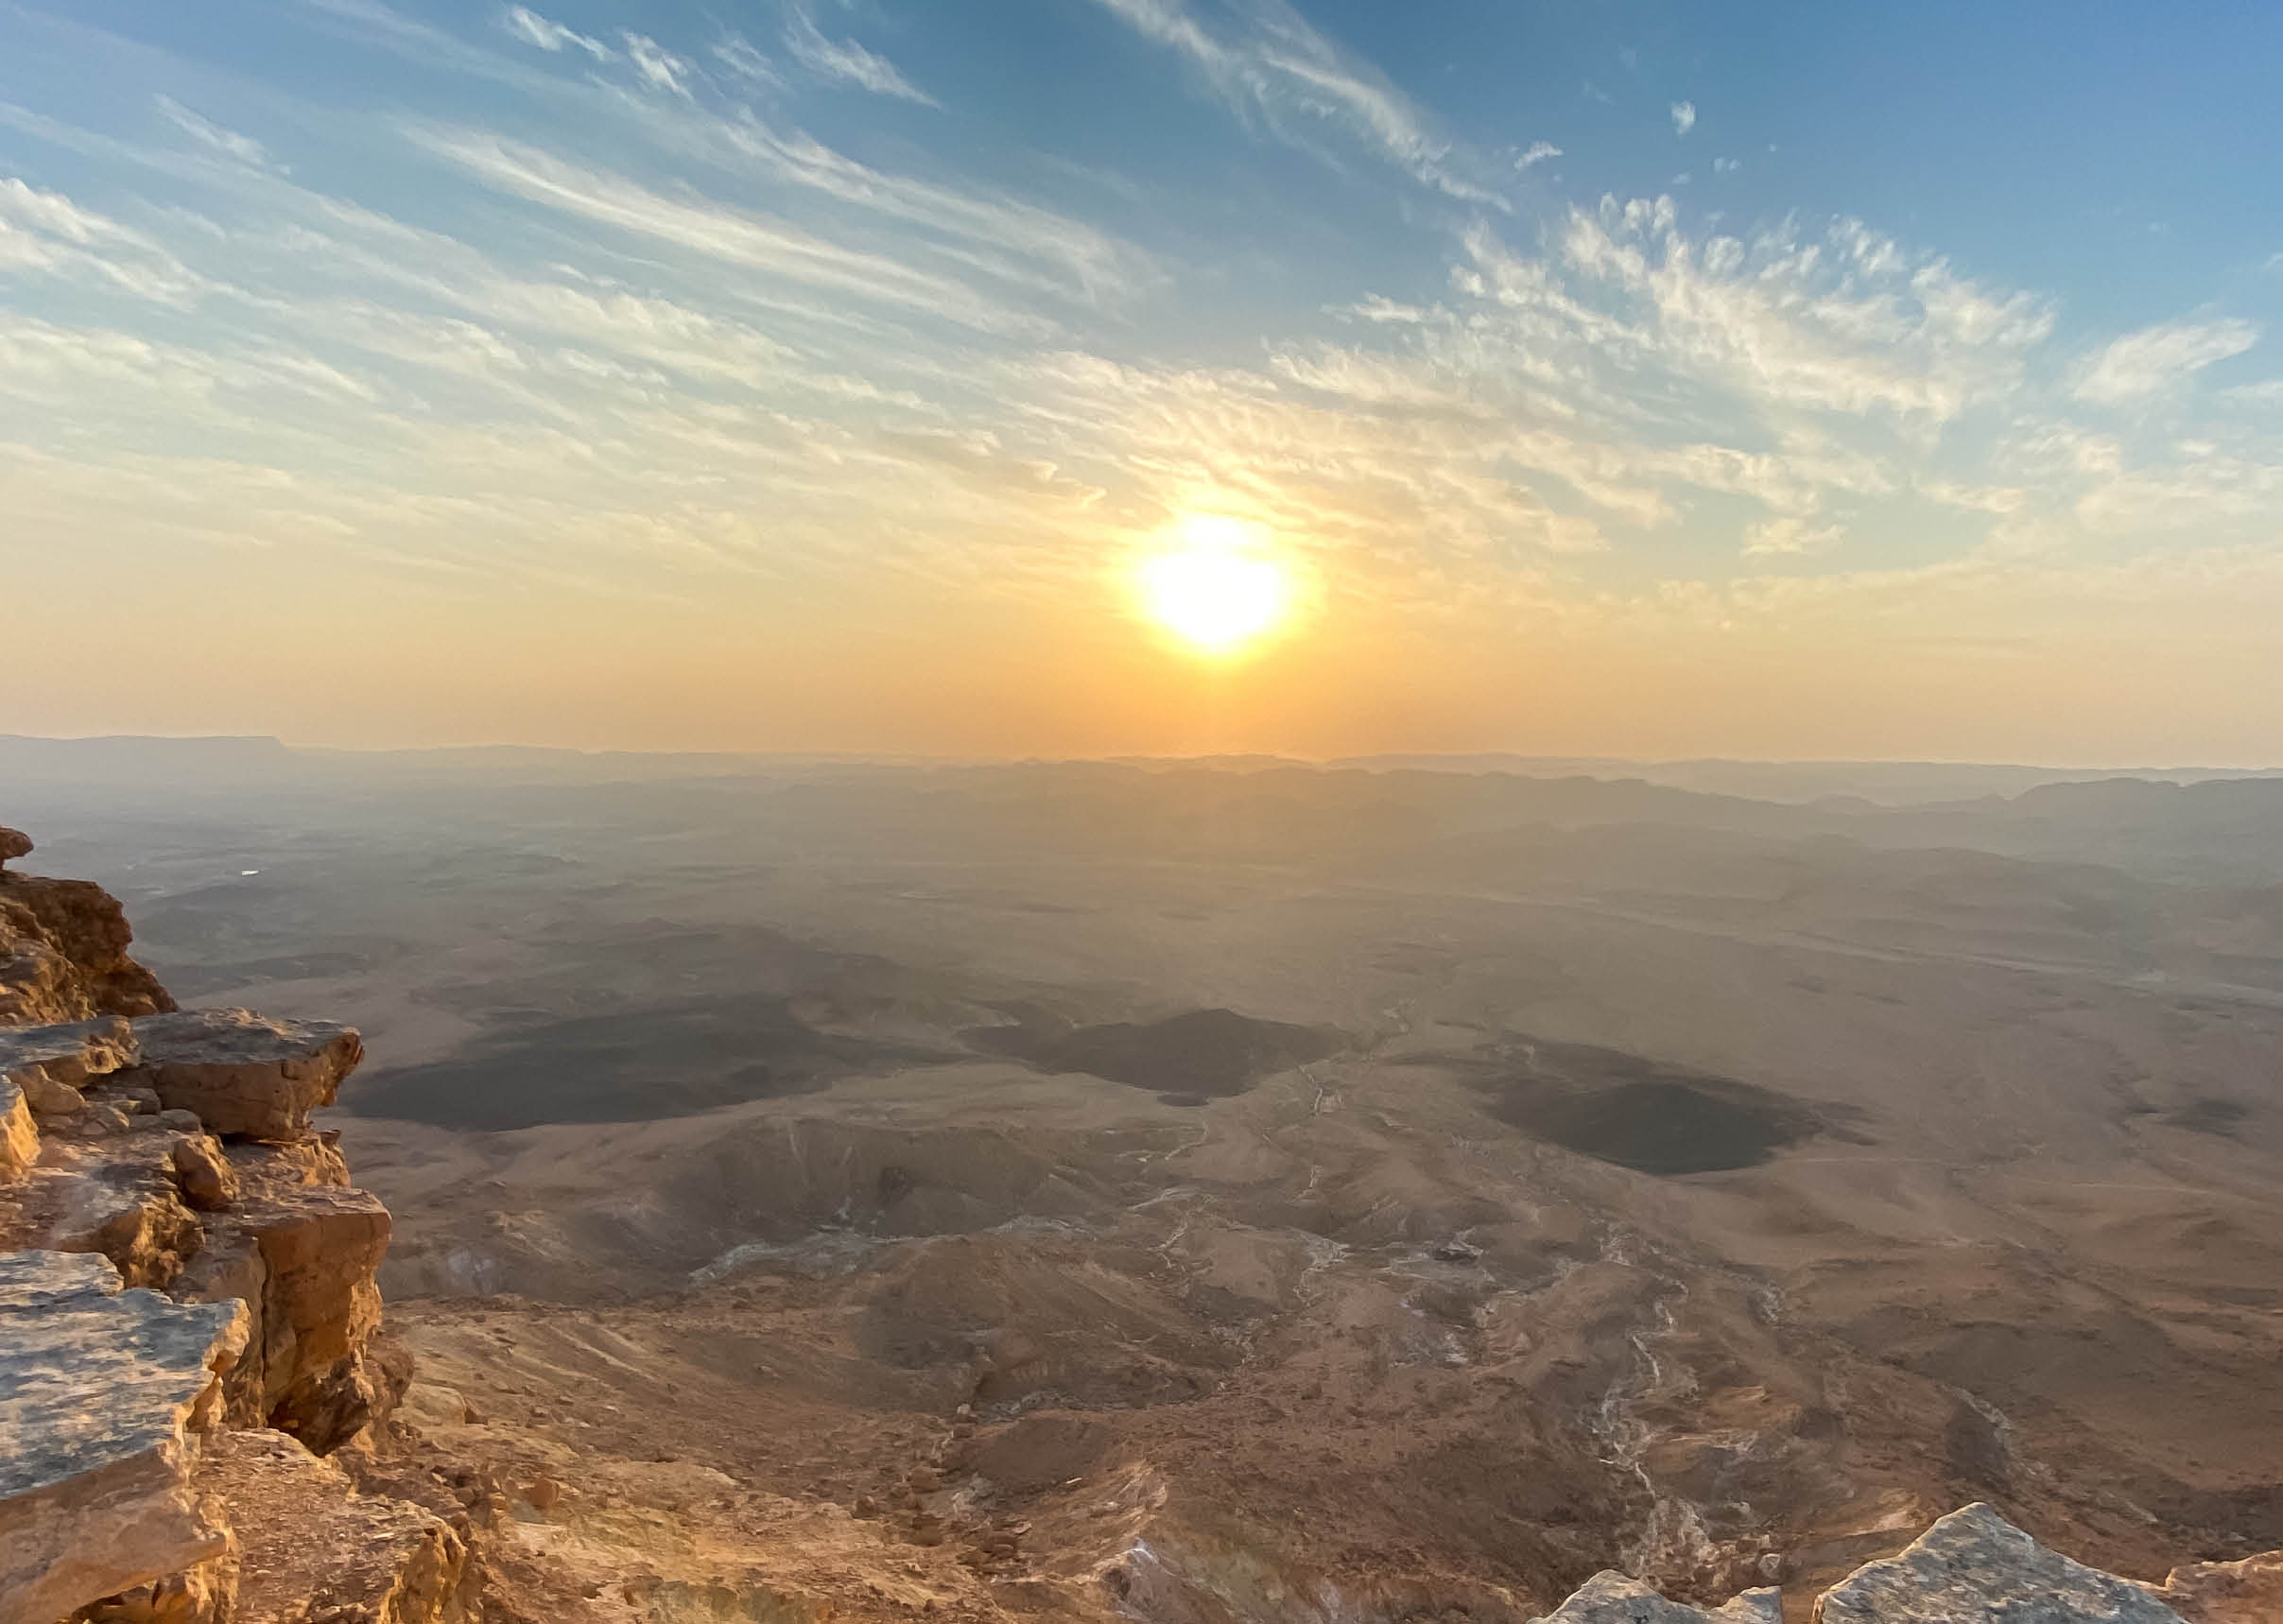 Panoramic View of the sunrise at the Makhtesh Ramon Crator at Mitzpe Ramon, Sothern Negev, Israel 